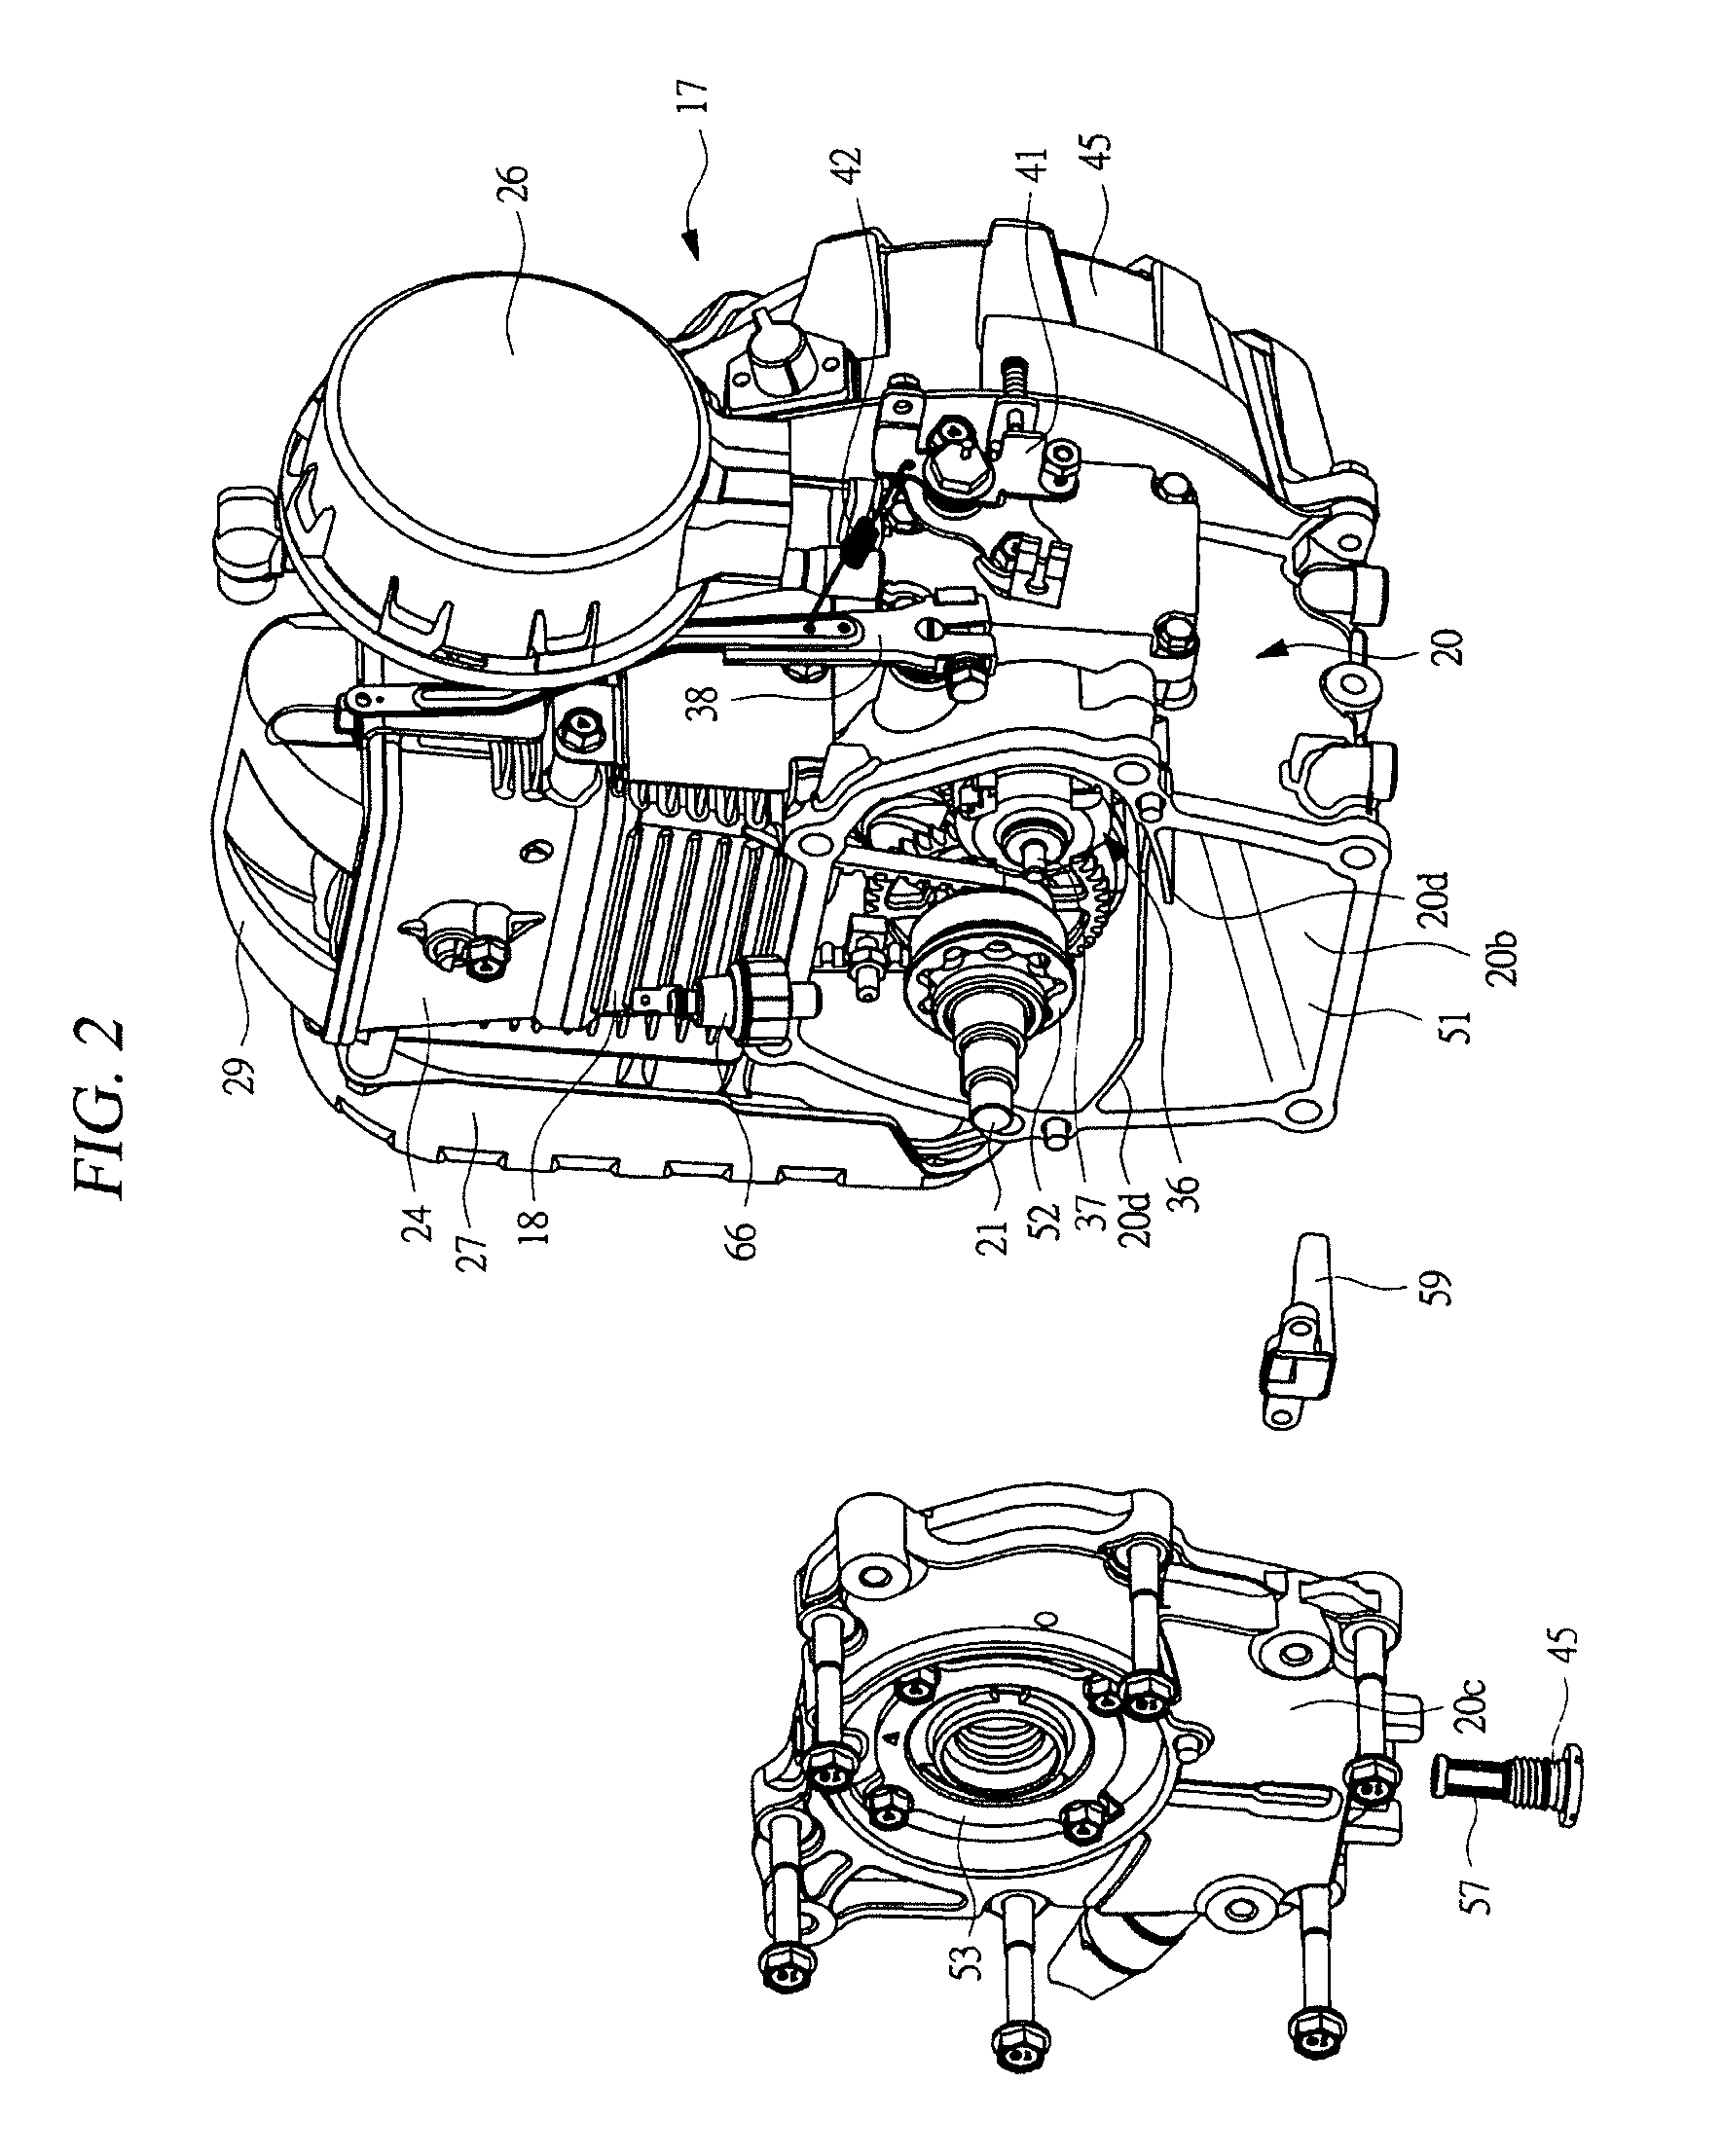 Rollover detection device for general-purpose engine